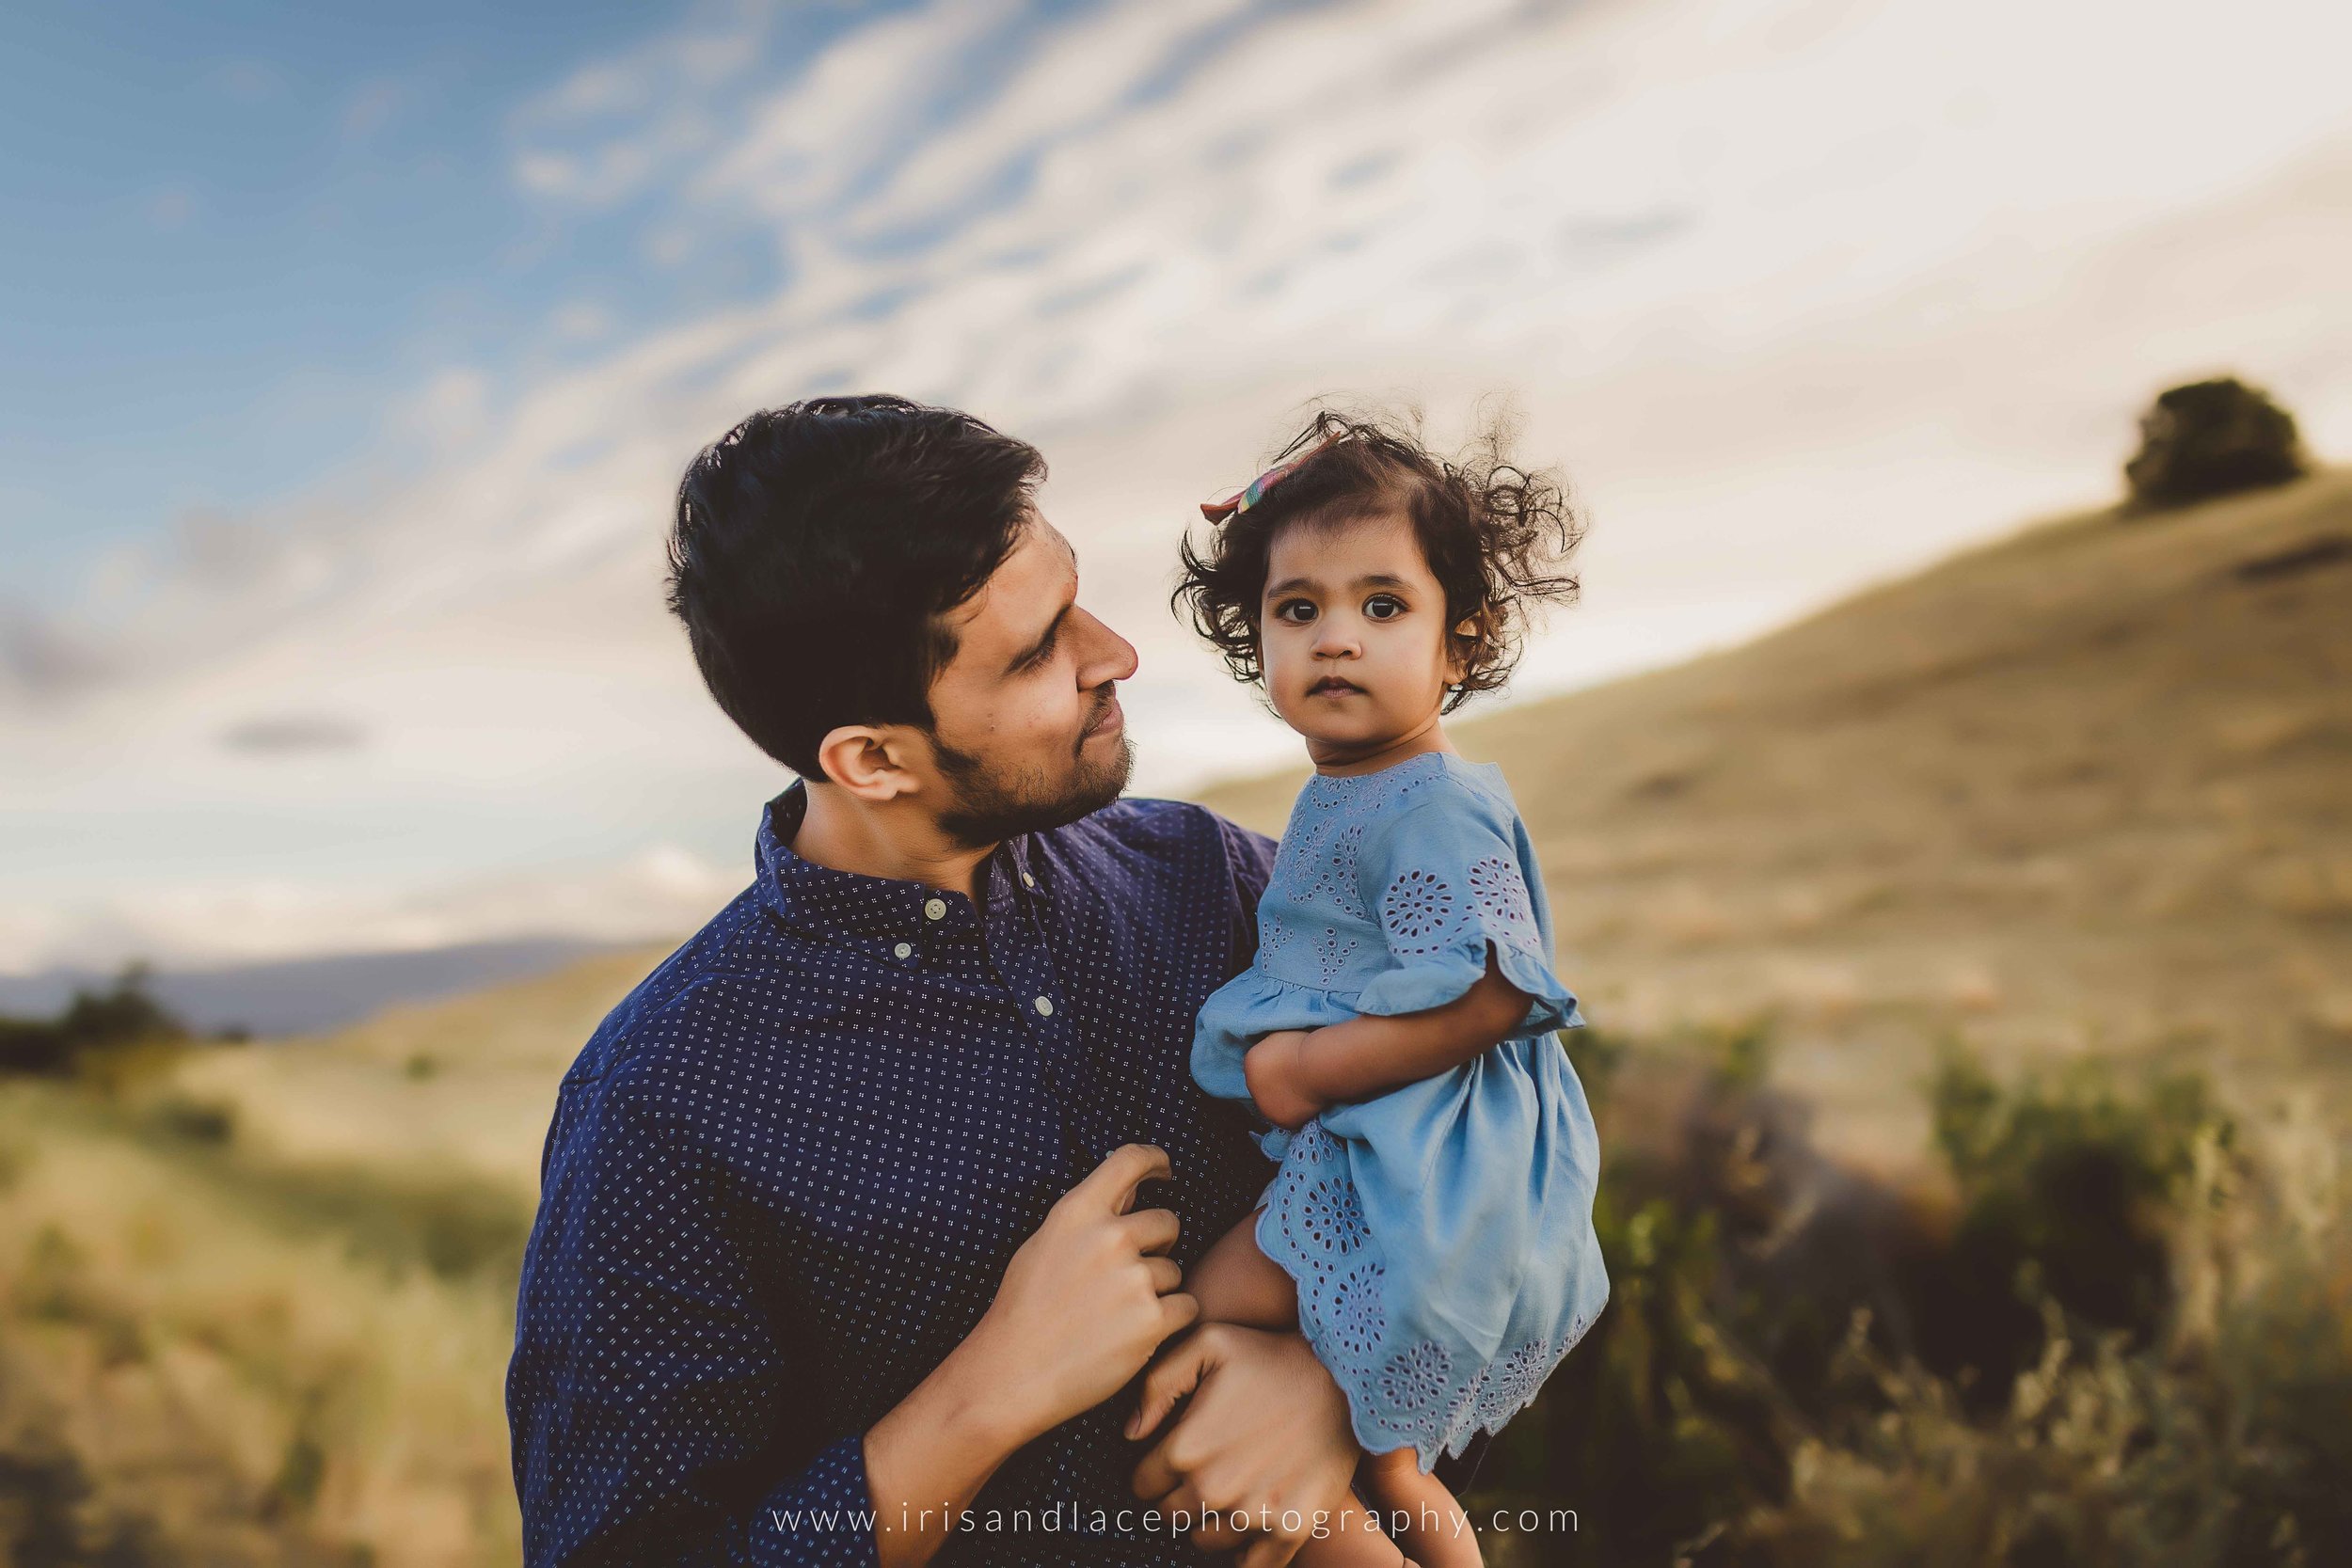 Mountain View Family Photography  |  Iris and Lace Photography  |  Modern, Unposed Family Portraits